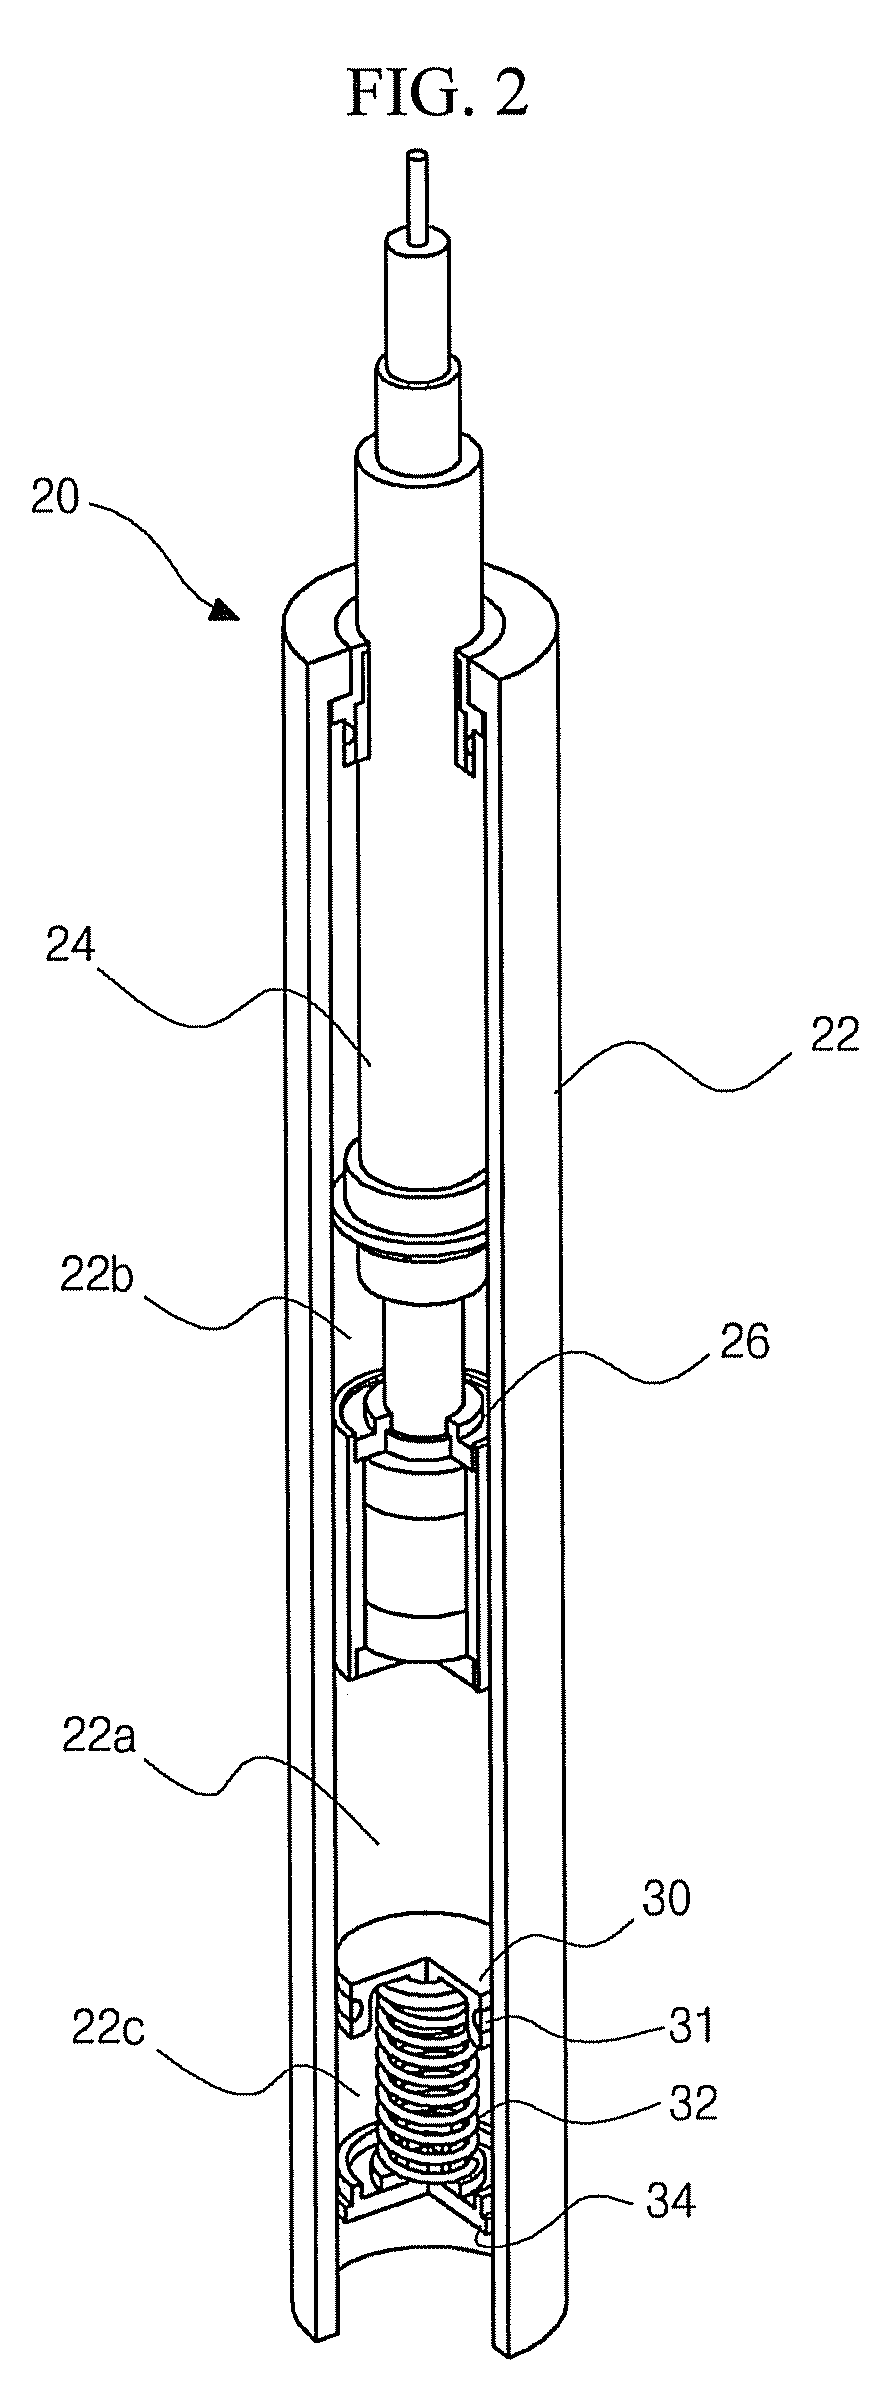 Damper for continuously variably adjusting damping force